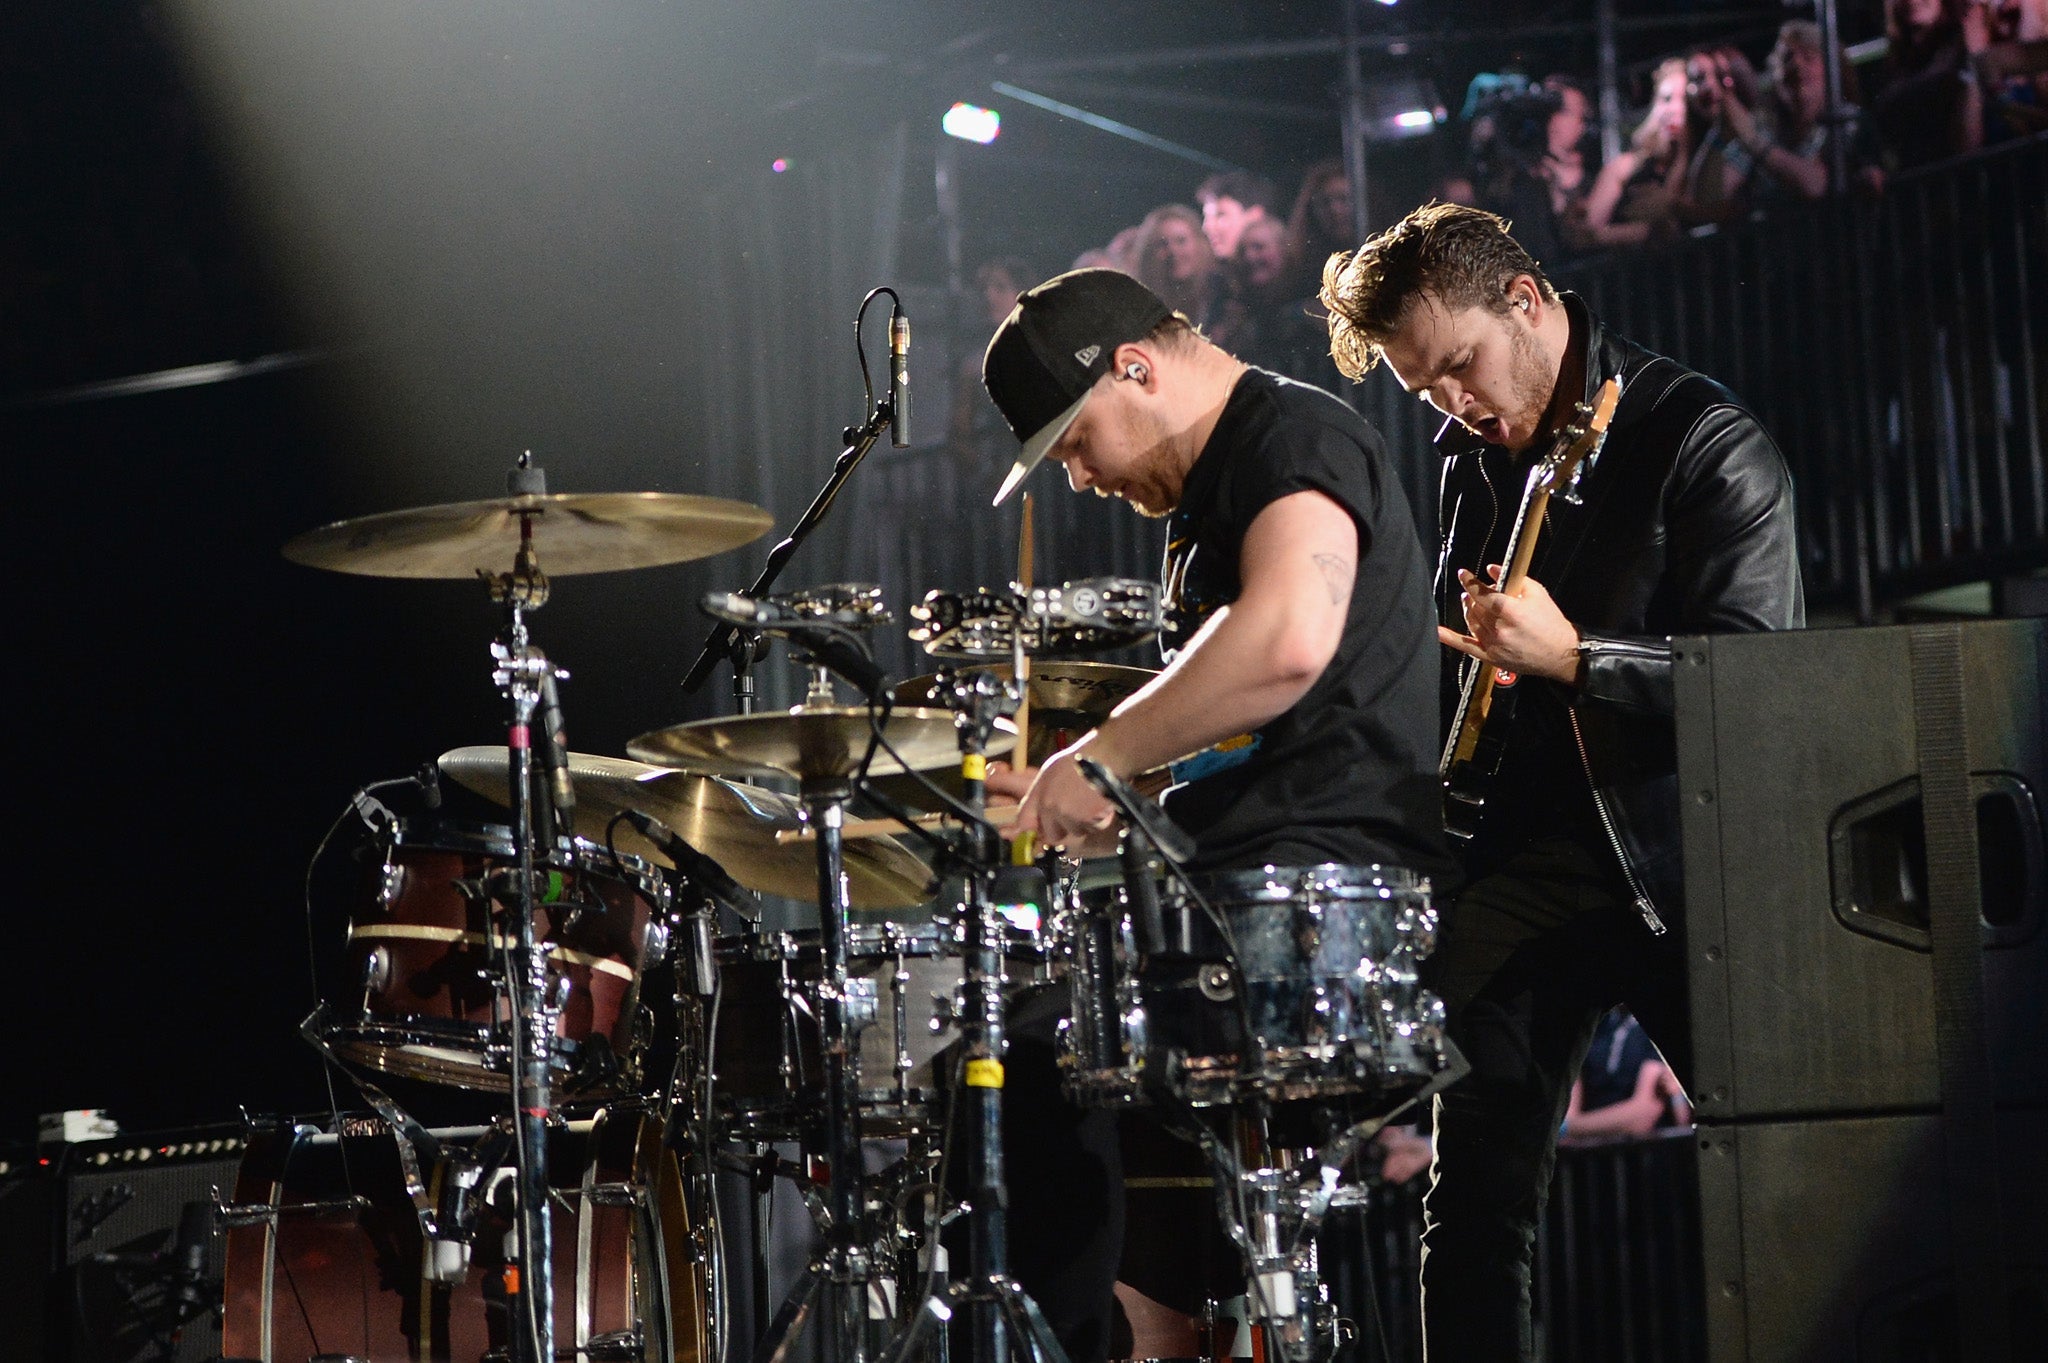 Royal Blood’s eponymous debut album went to No 1 in the UK albums chart and
was nominated for the 2014 Mercury Prize